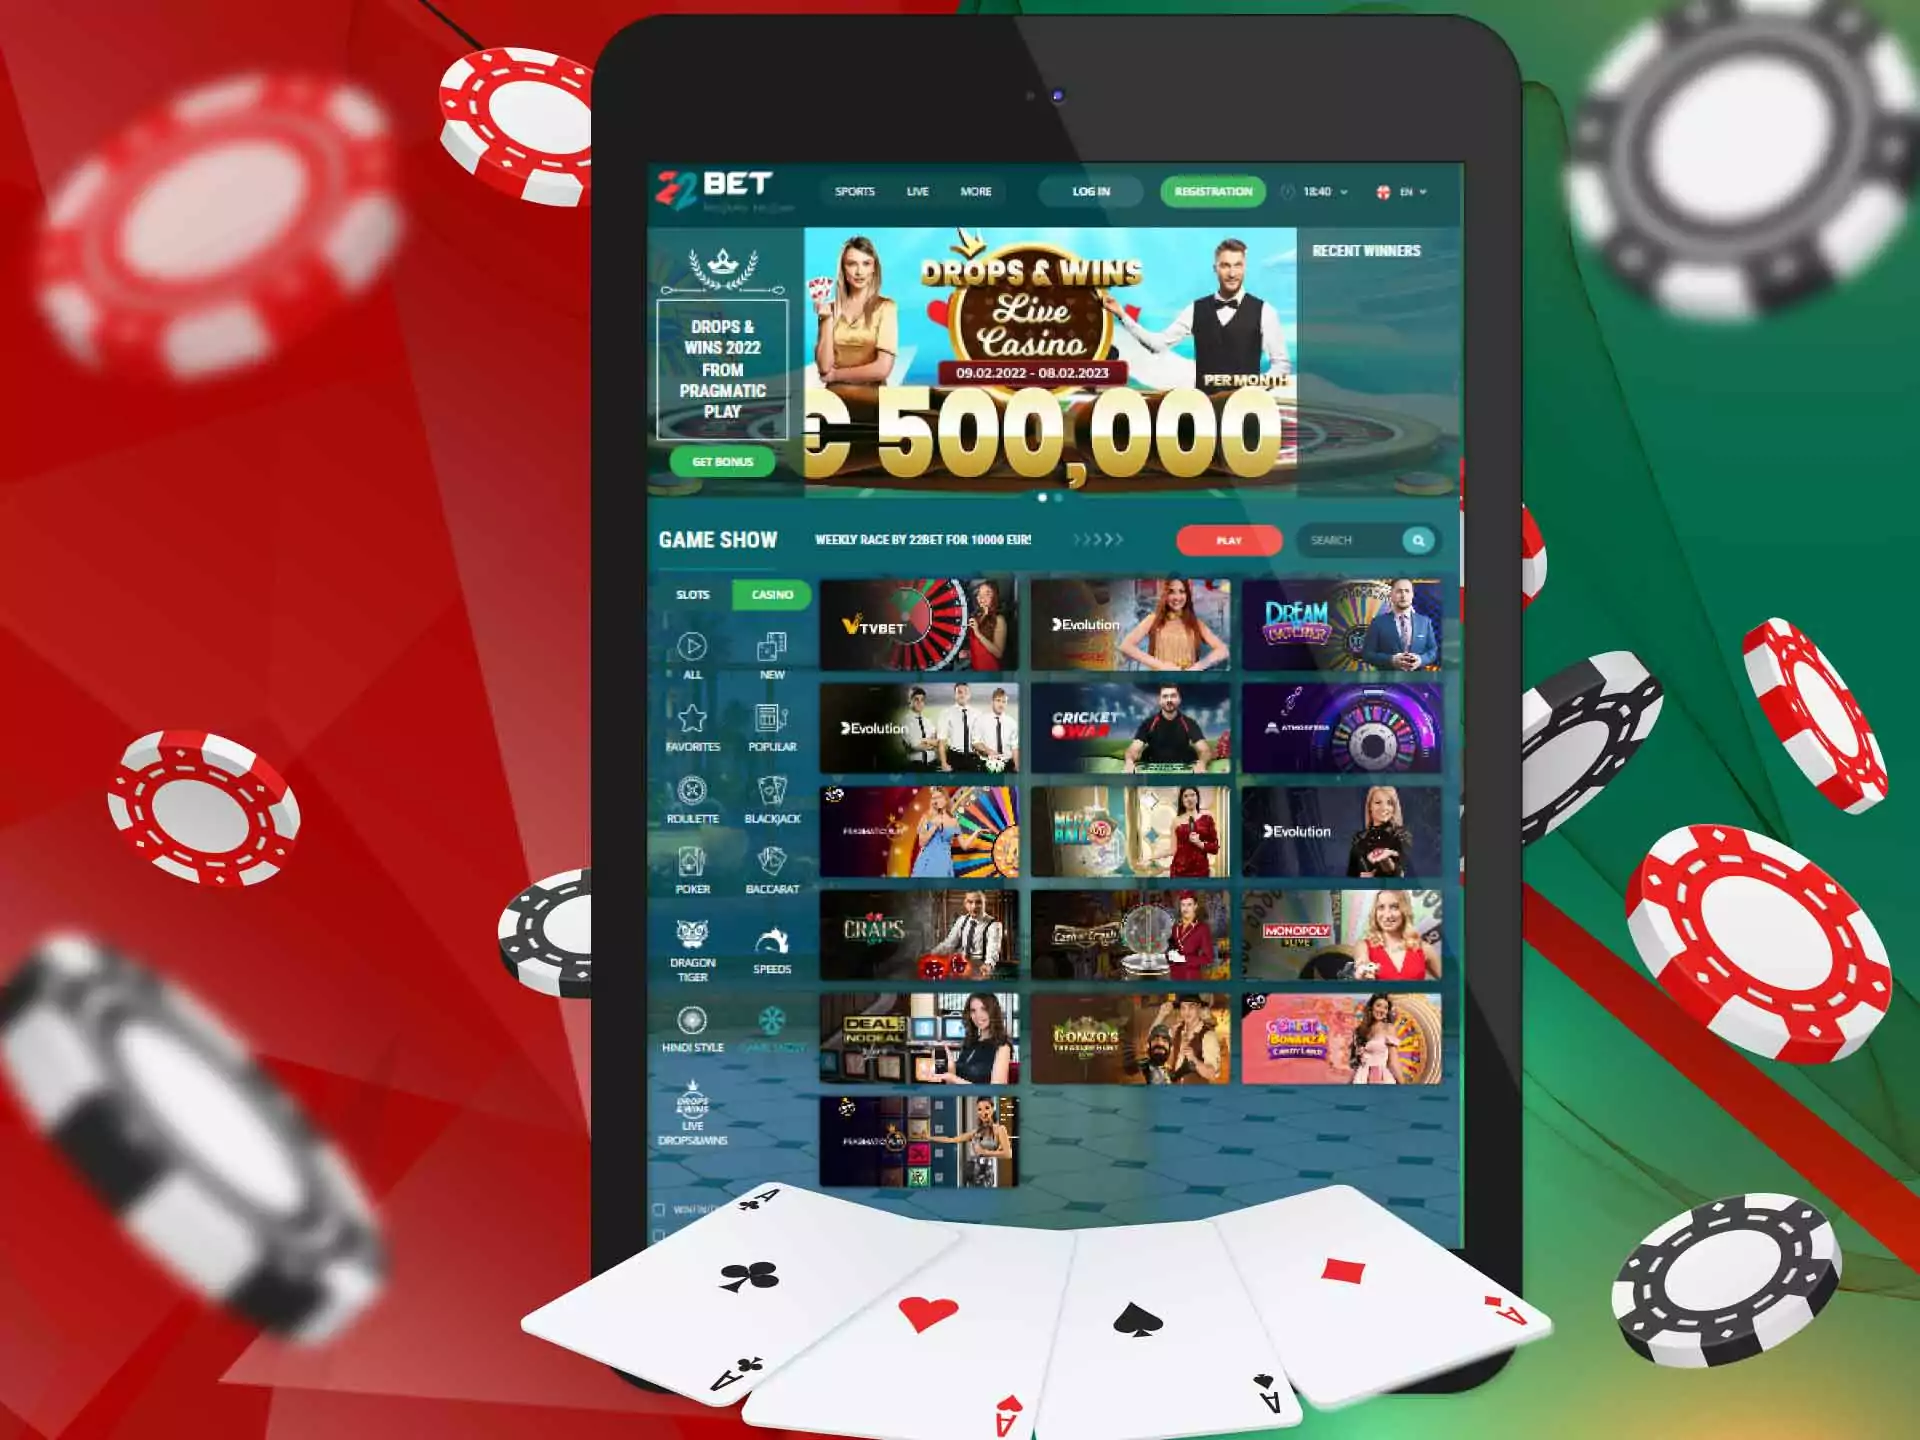 Visit our special section with 22Bet casino games.